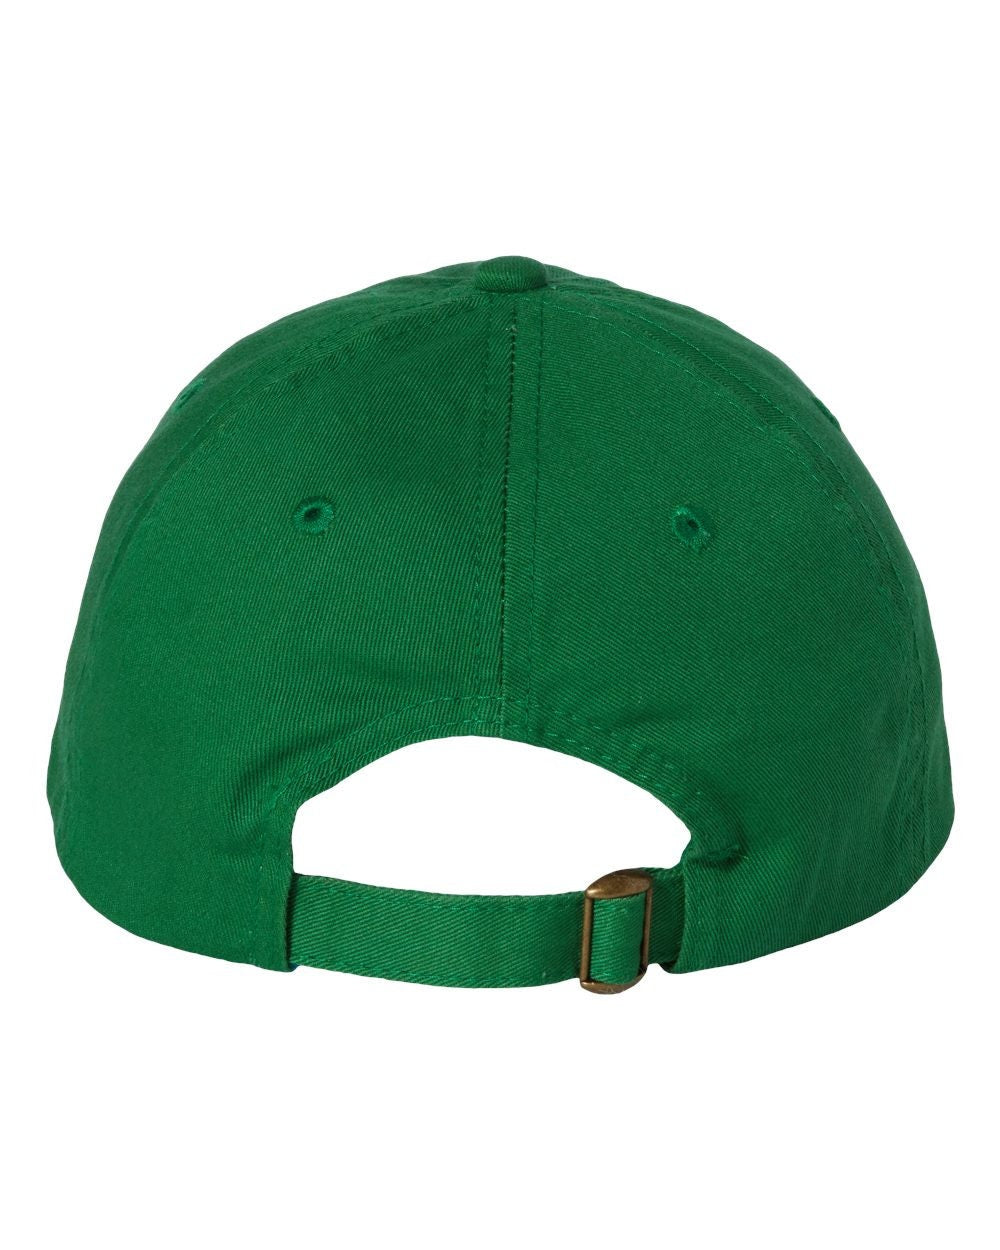 Puffed Shamrock St. Patrick's Day Embroidered Dad Hat | Green Baseball Cap | St. Paddy's Day